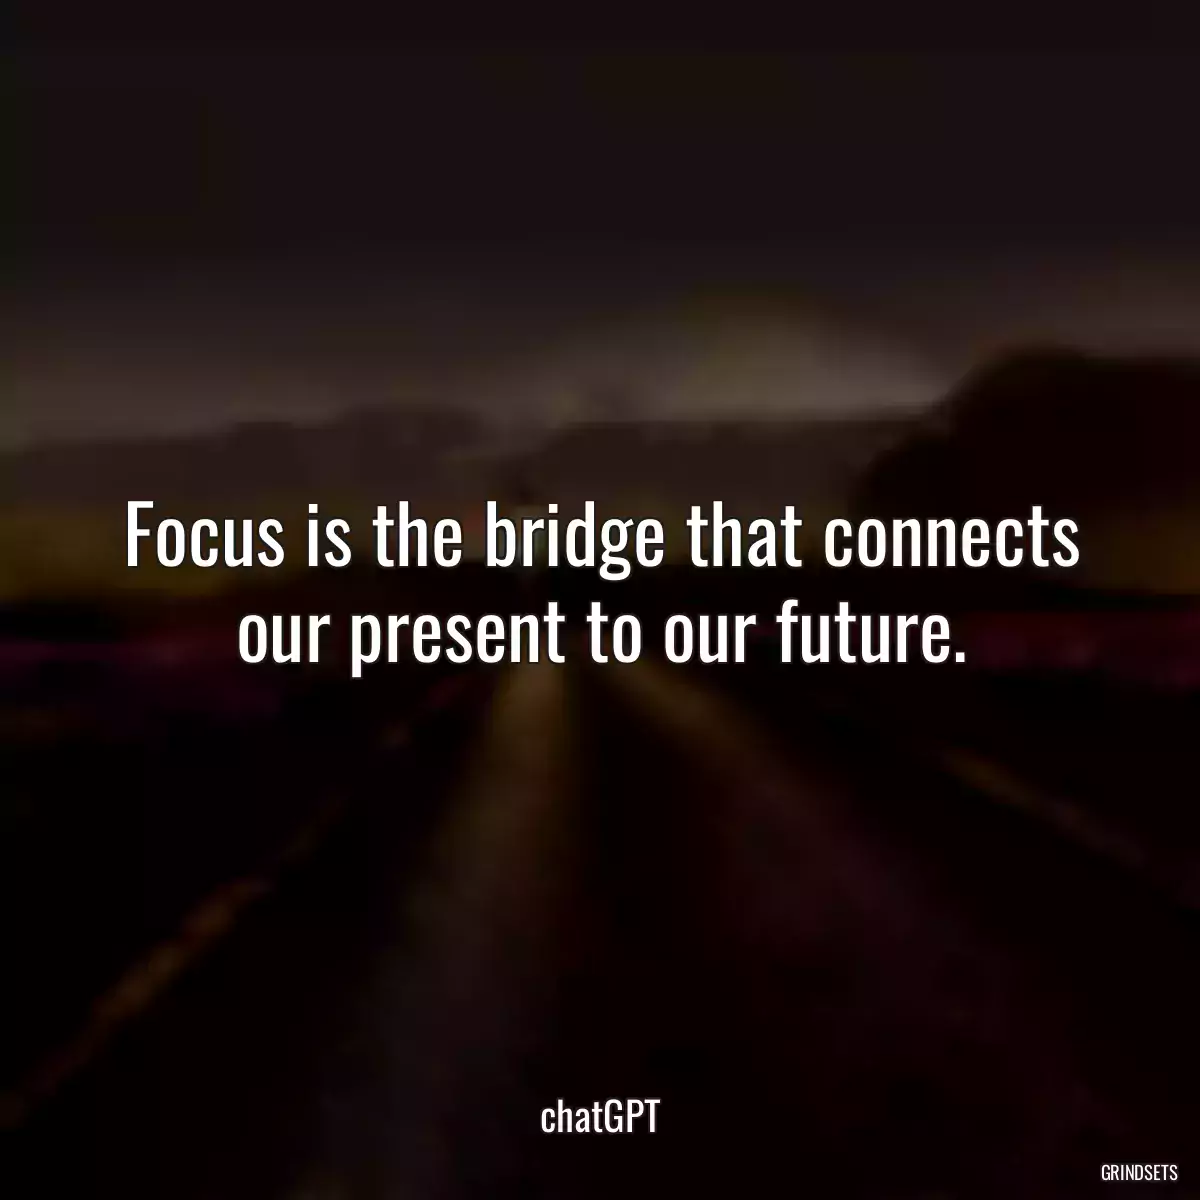 Focus is the bridge that connects our present to our future.